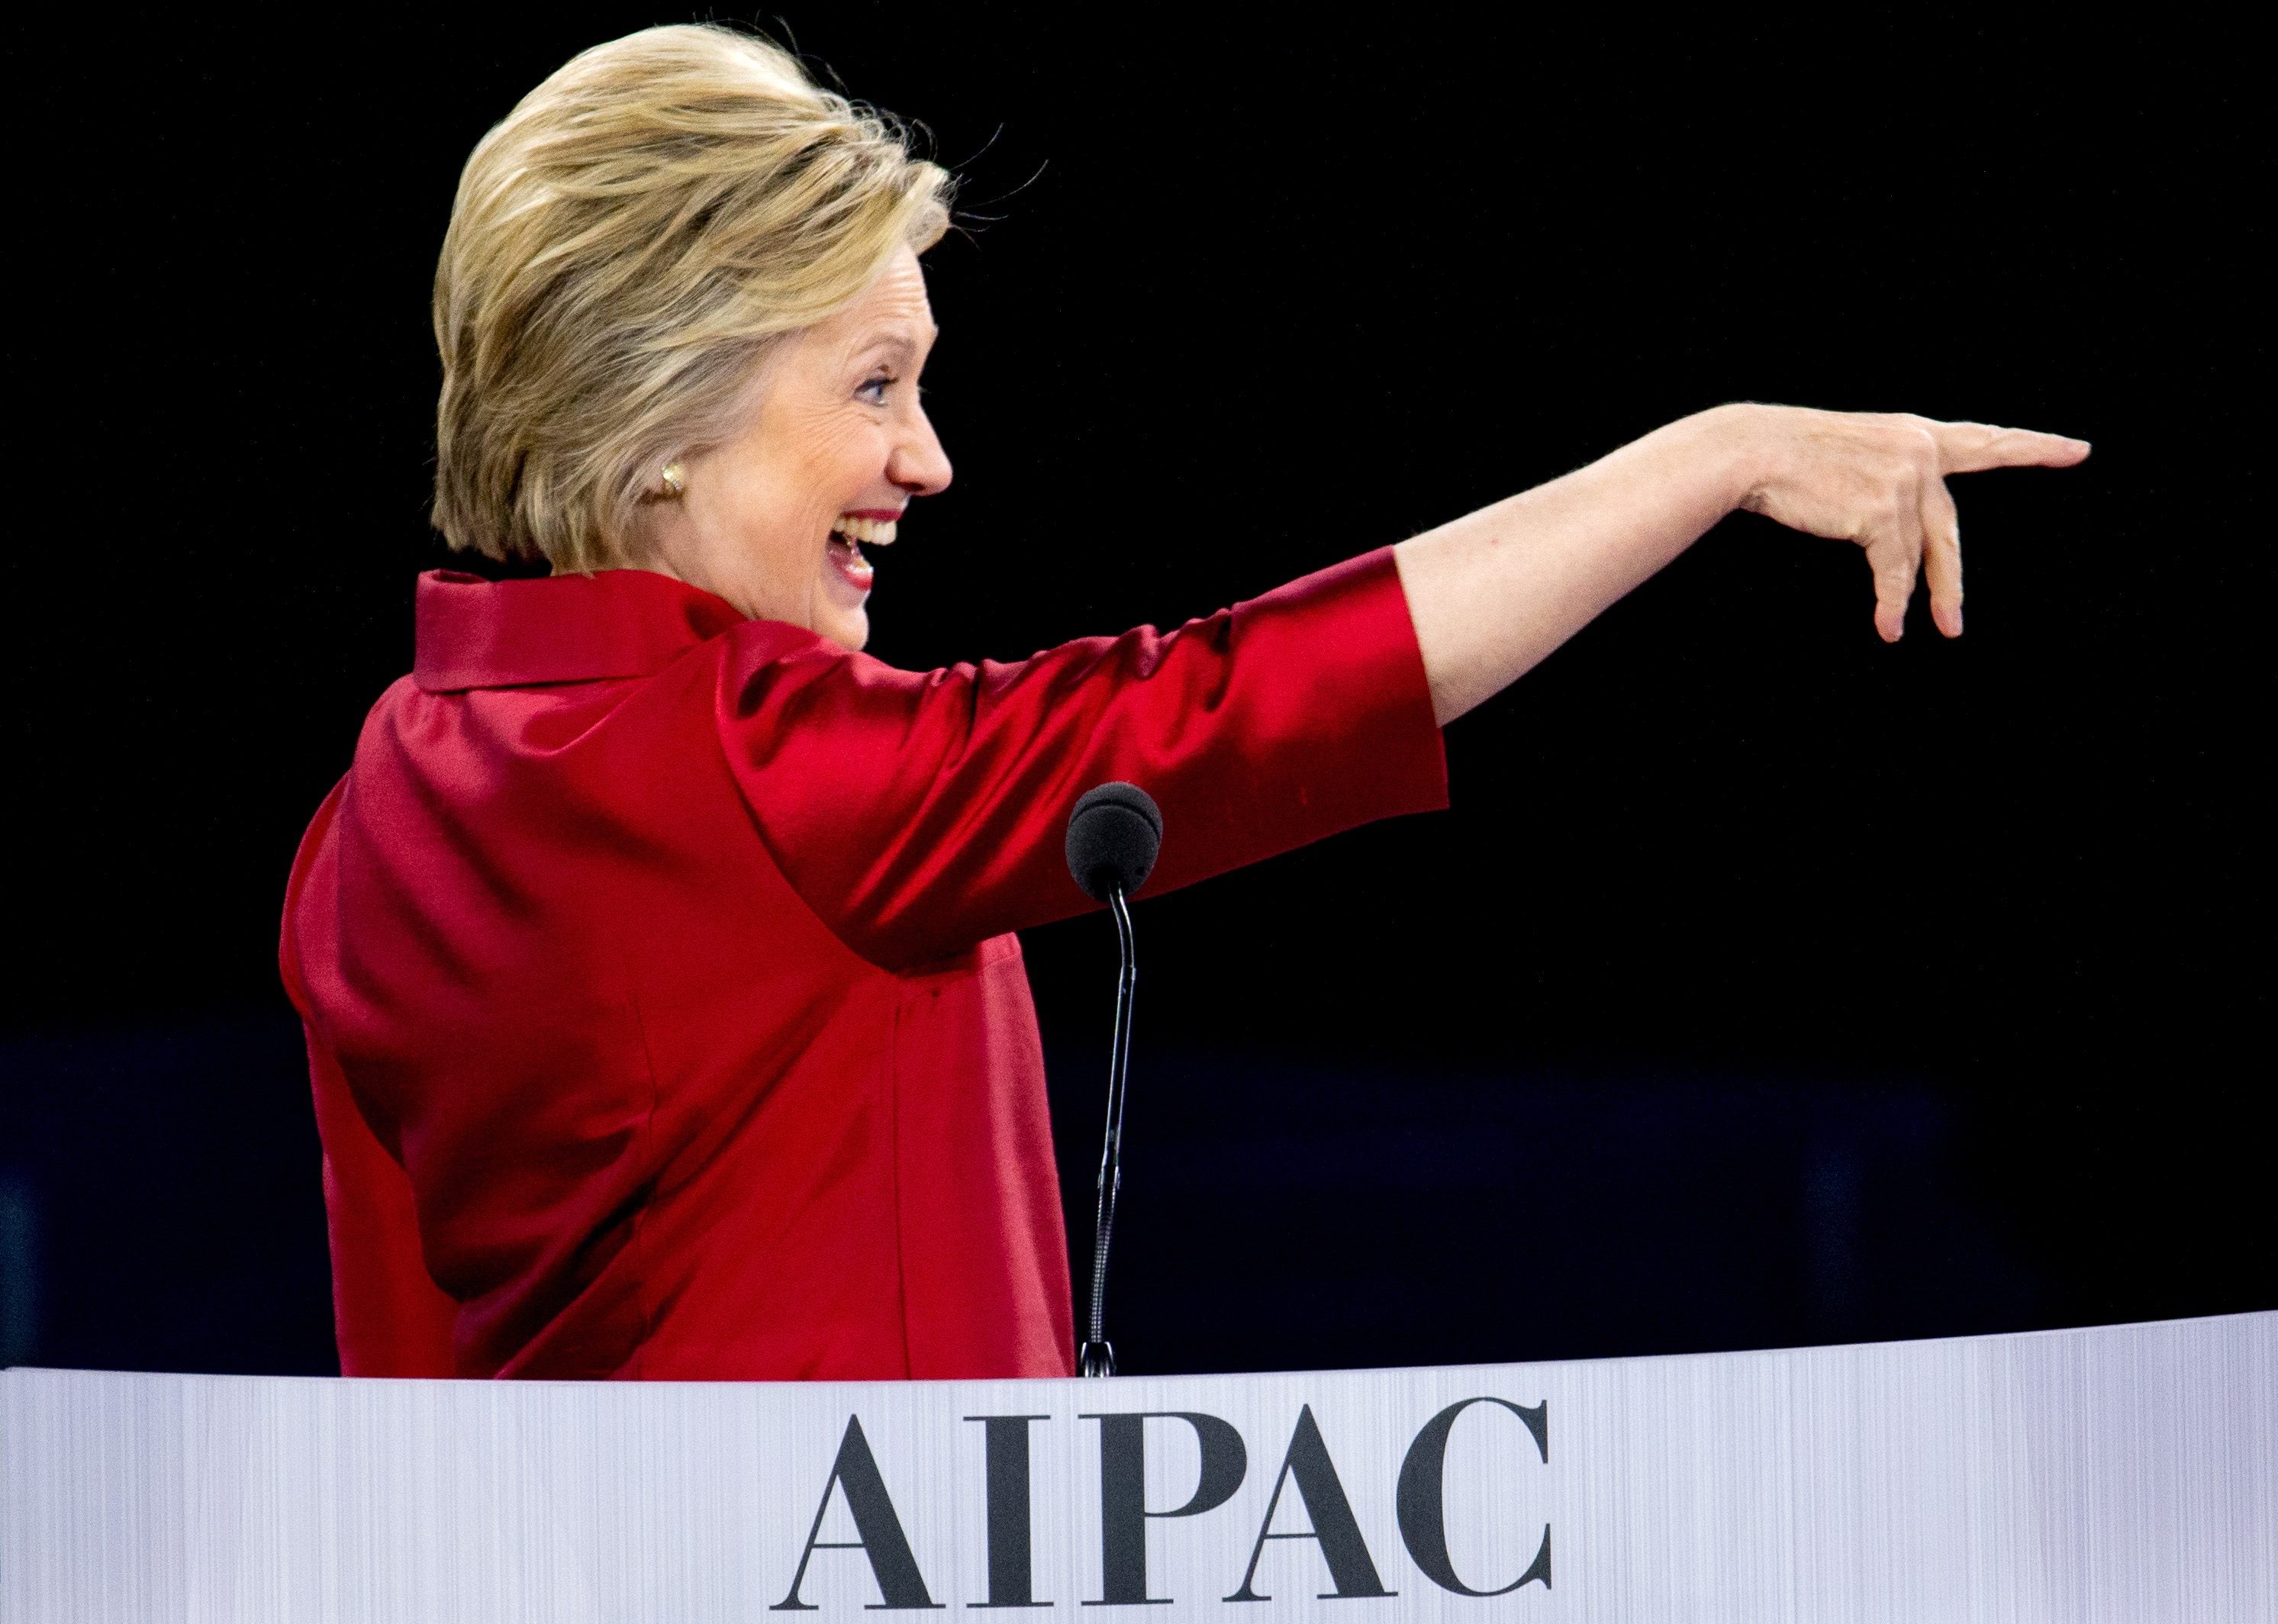 Democratic presidential candidate Hillary Clinton points after speaking at the 2016 American Israel Public Affairs Committee (AIPAC) Policy Conference, Monday, March 21, 2016, at the Verizon Center in Washington.